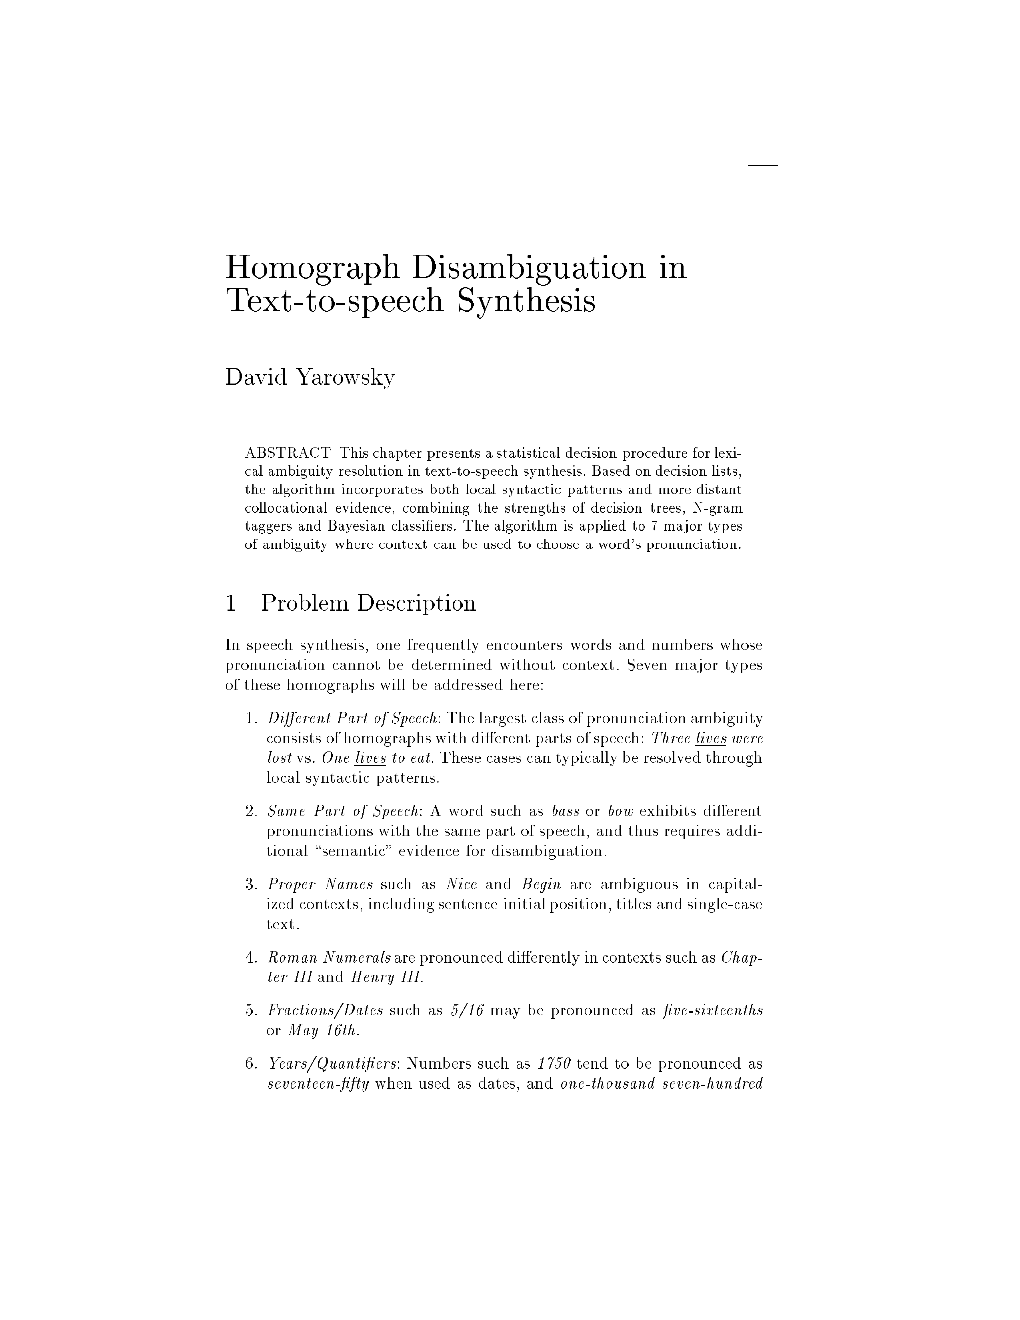 Homograph Disambiguation in Text-To-Speech Synthesis